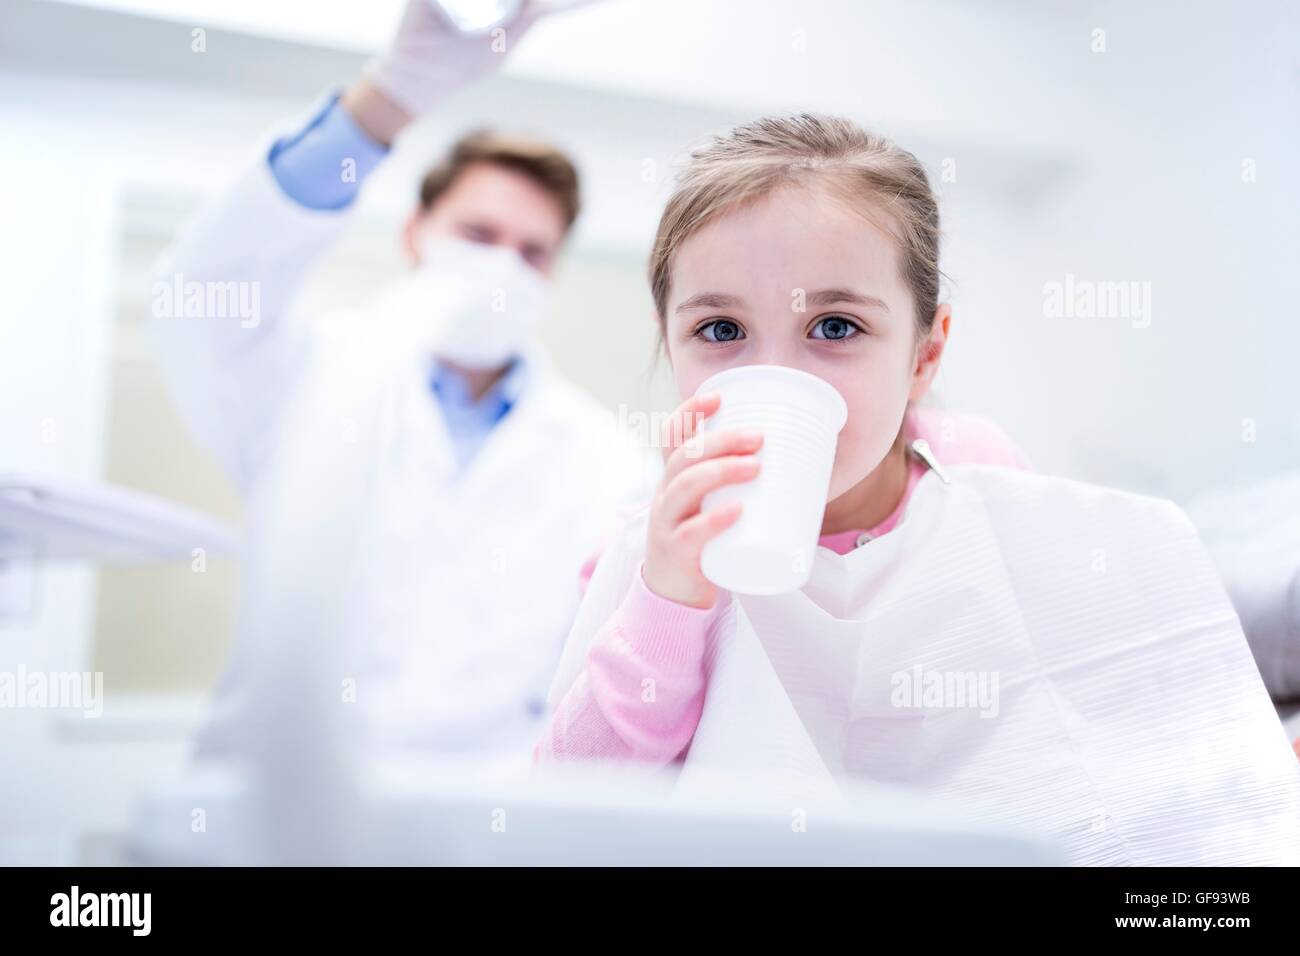 MODEL RELEASED. Portrait of girl drinking water in clinic. Stock Photo